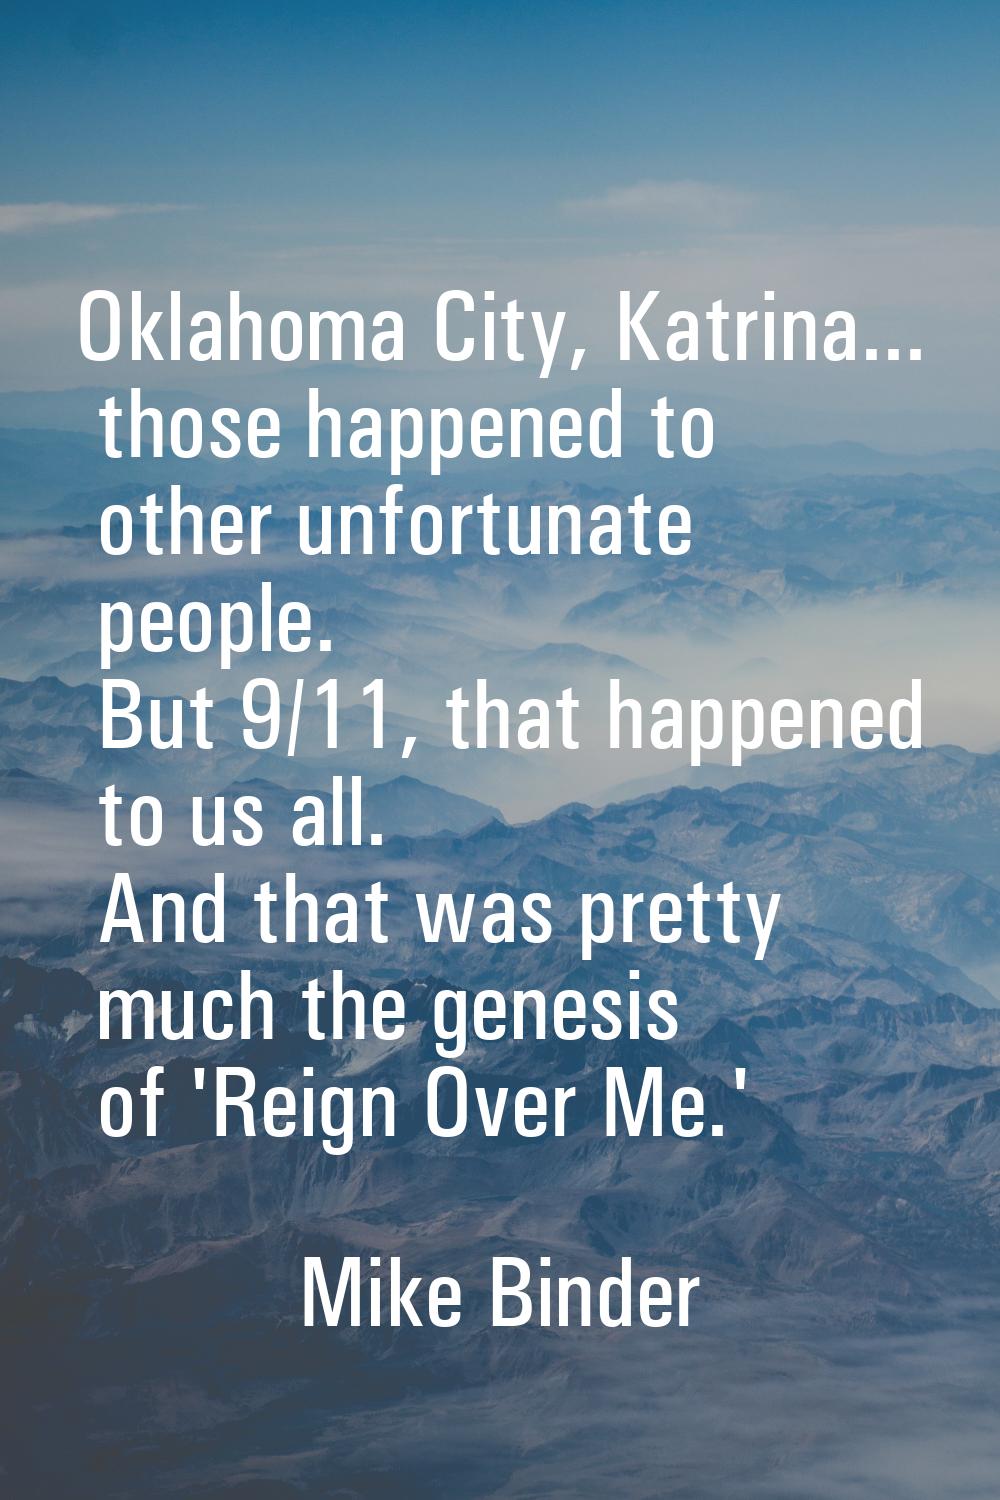 Oklahoma City, Katrina... those happened to other unfortunate people. But 9/11, that happened to us